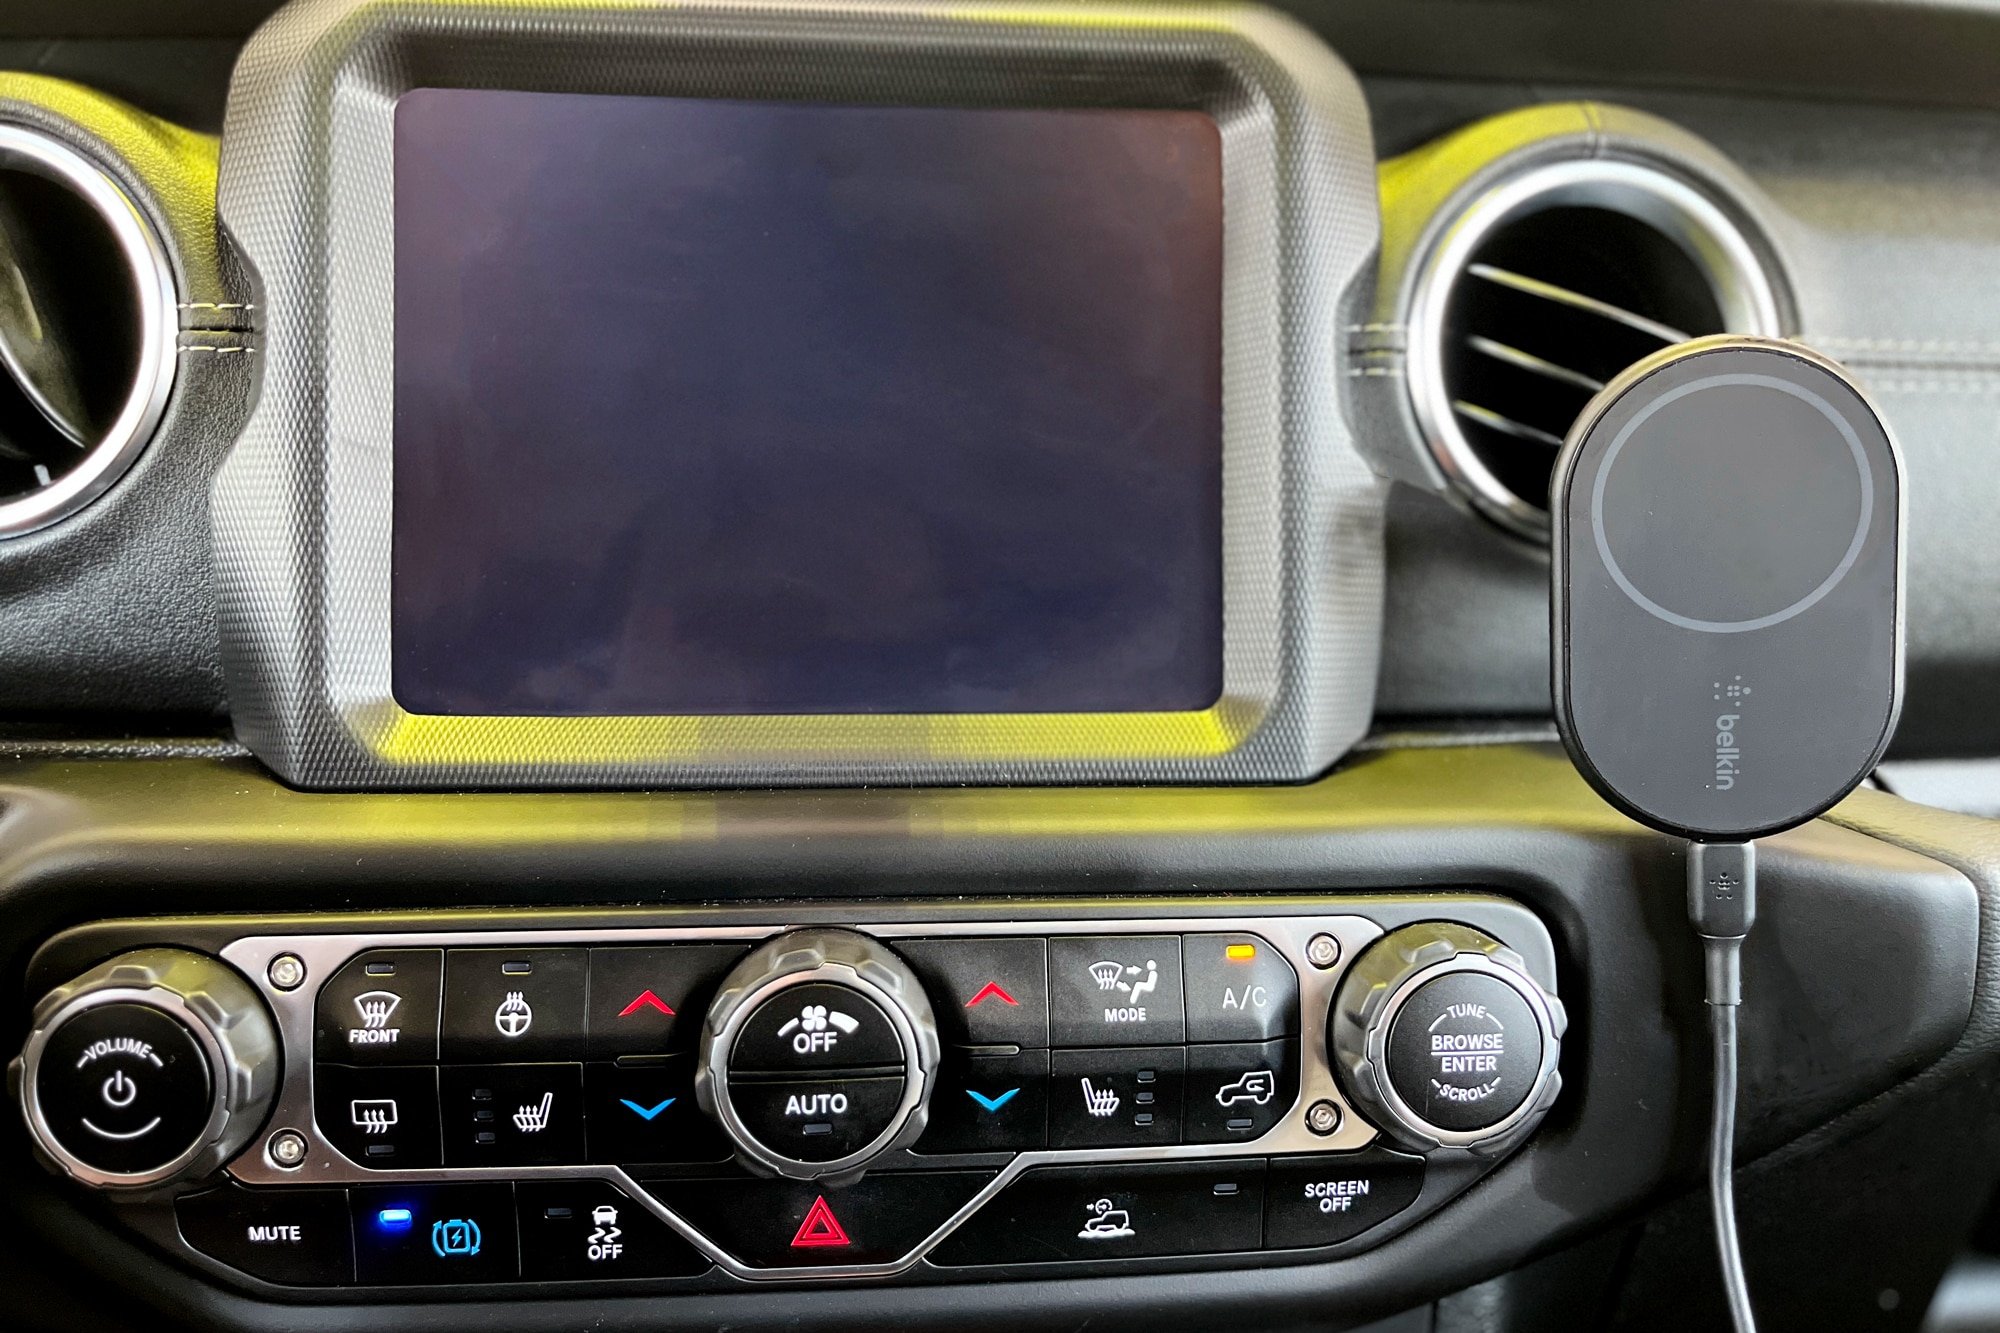 Belkin MagSafe mobile wireless car charger plugged into a Jeep Wrangler's dashboard